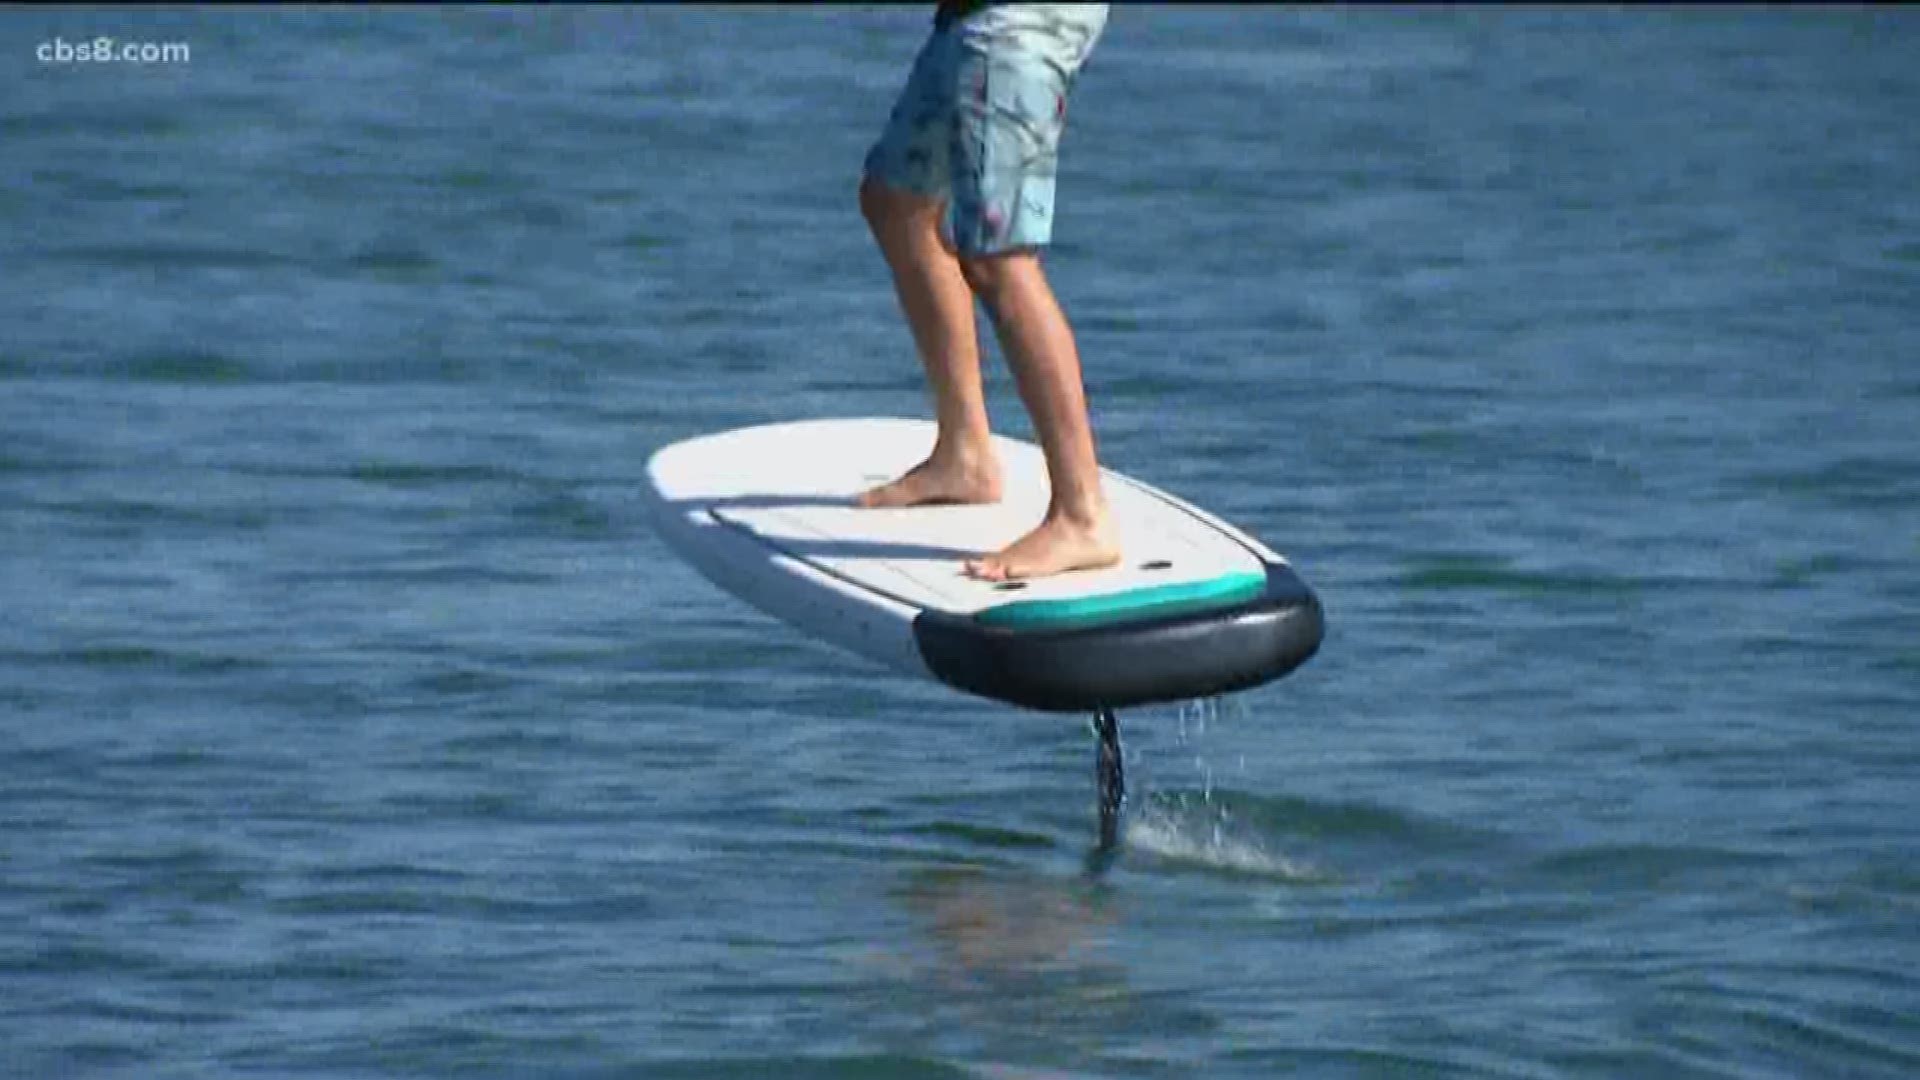 The E-foil is an eco-friendly e-propulsion foil. Basically, you're surfing AKA flying above the water!